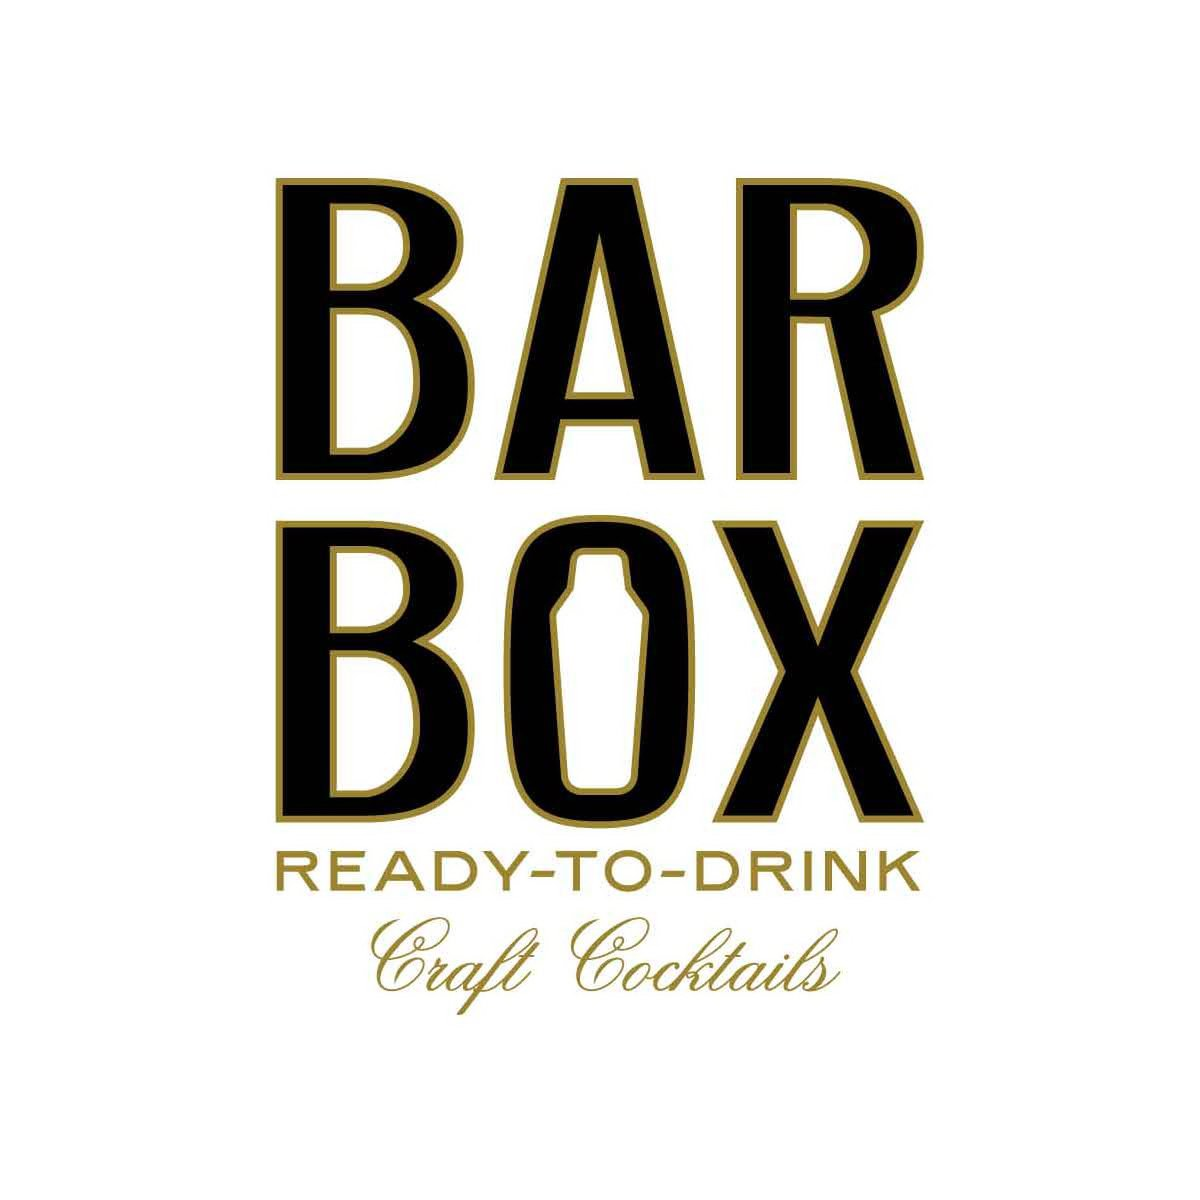  BAR BOX READY TO DRINK CRAFT COCKTAILS